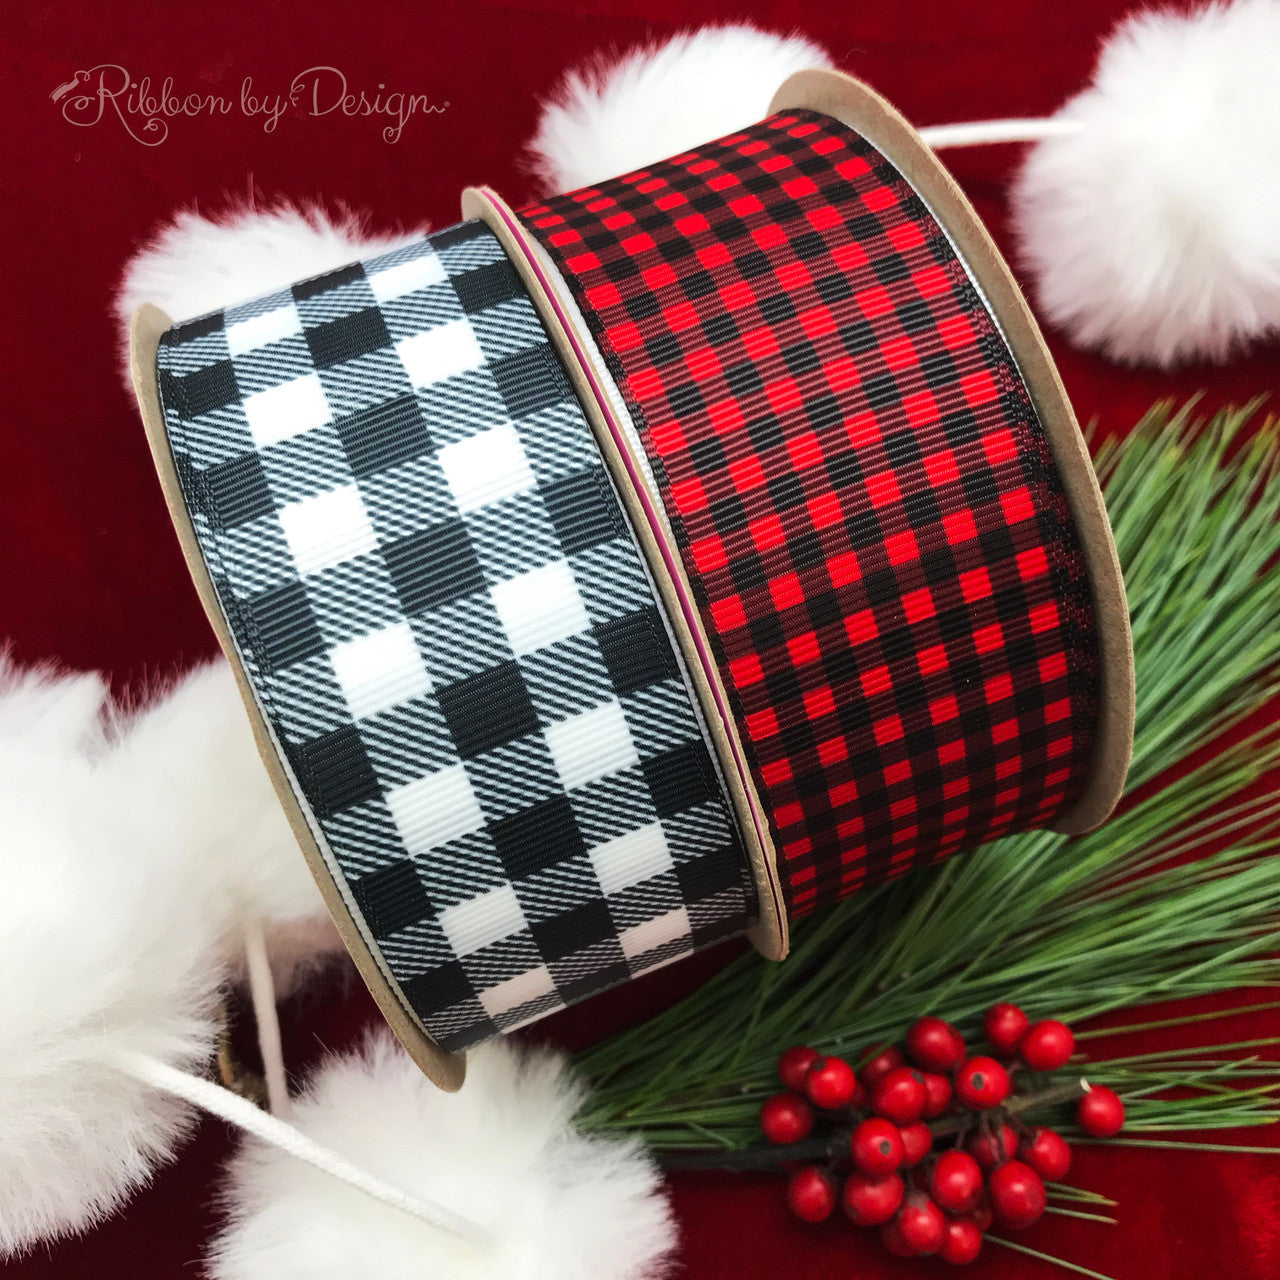 Mix and match plaids for the holiday season for and elegant country look!